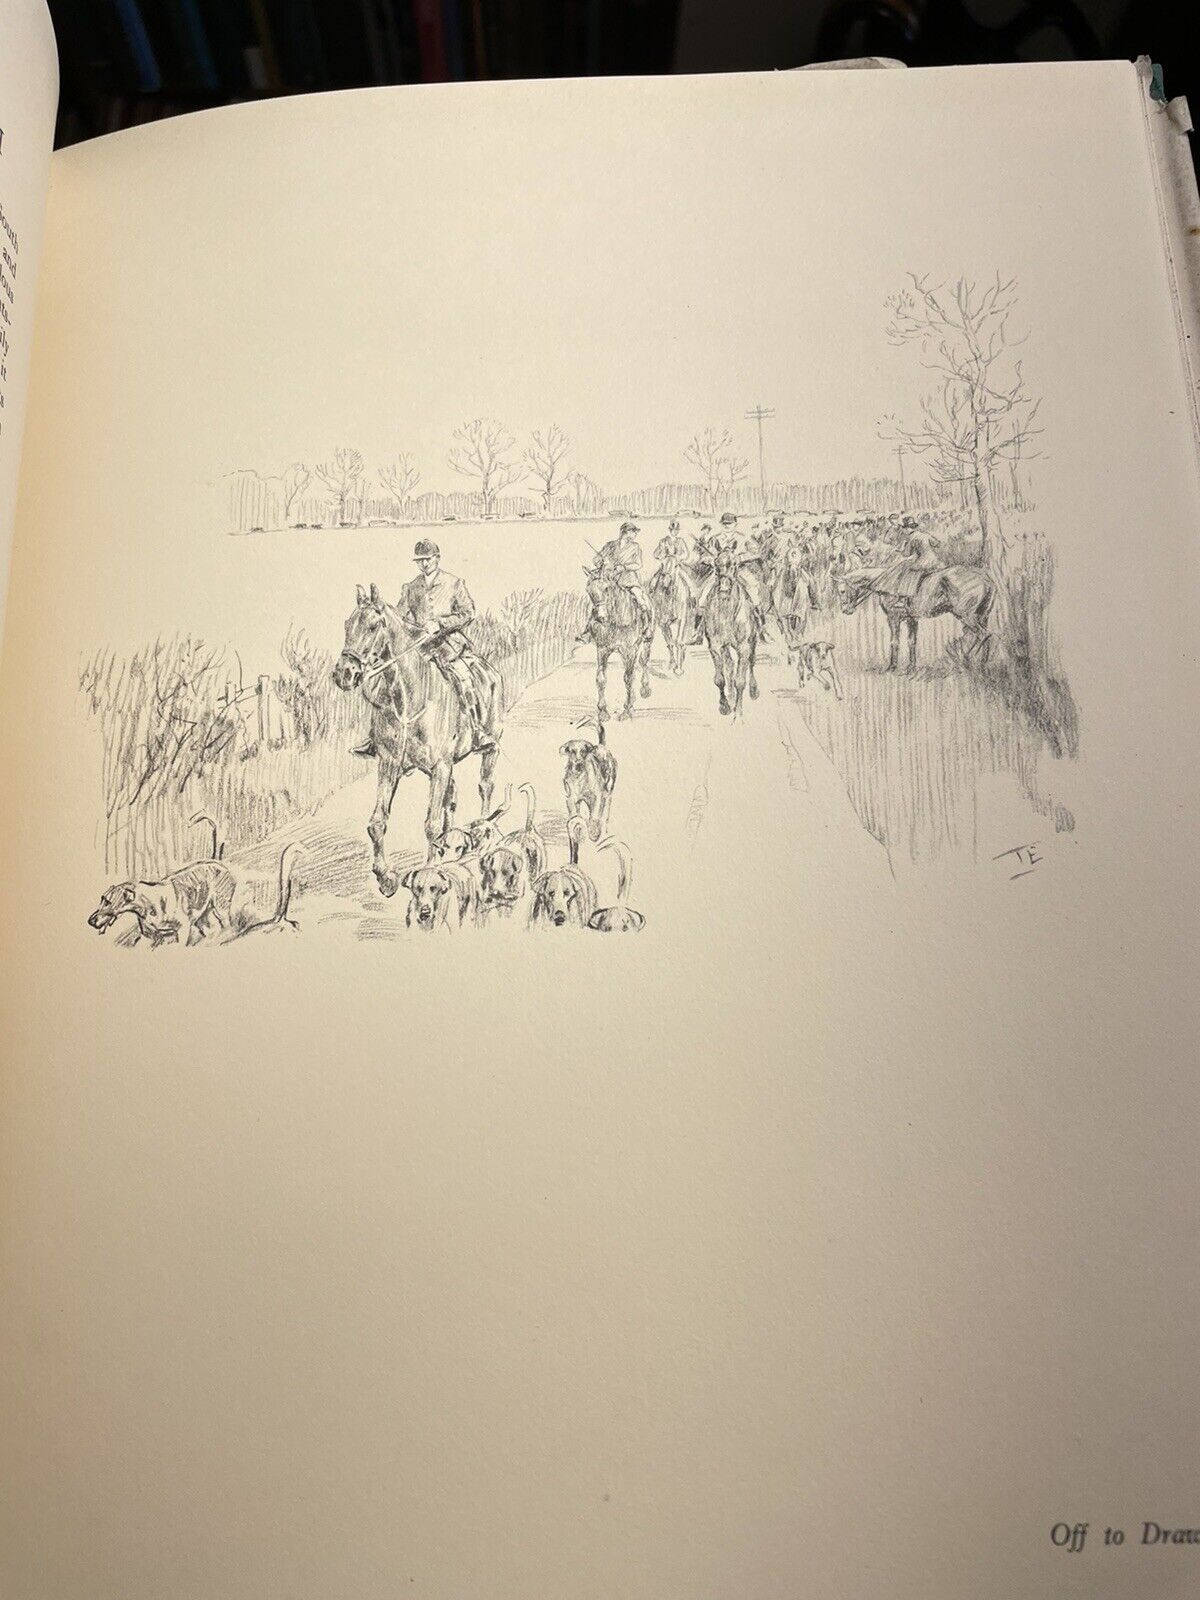 1937 Seen from the Saddle : Lionel Edwards : Wonderful Horse Illustrations 1st